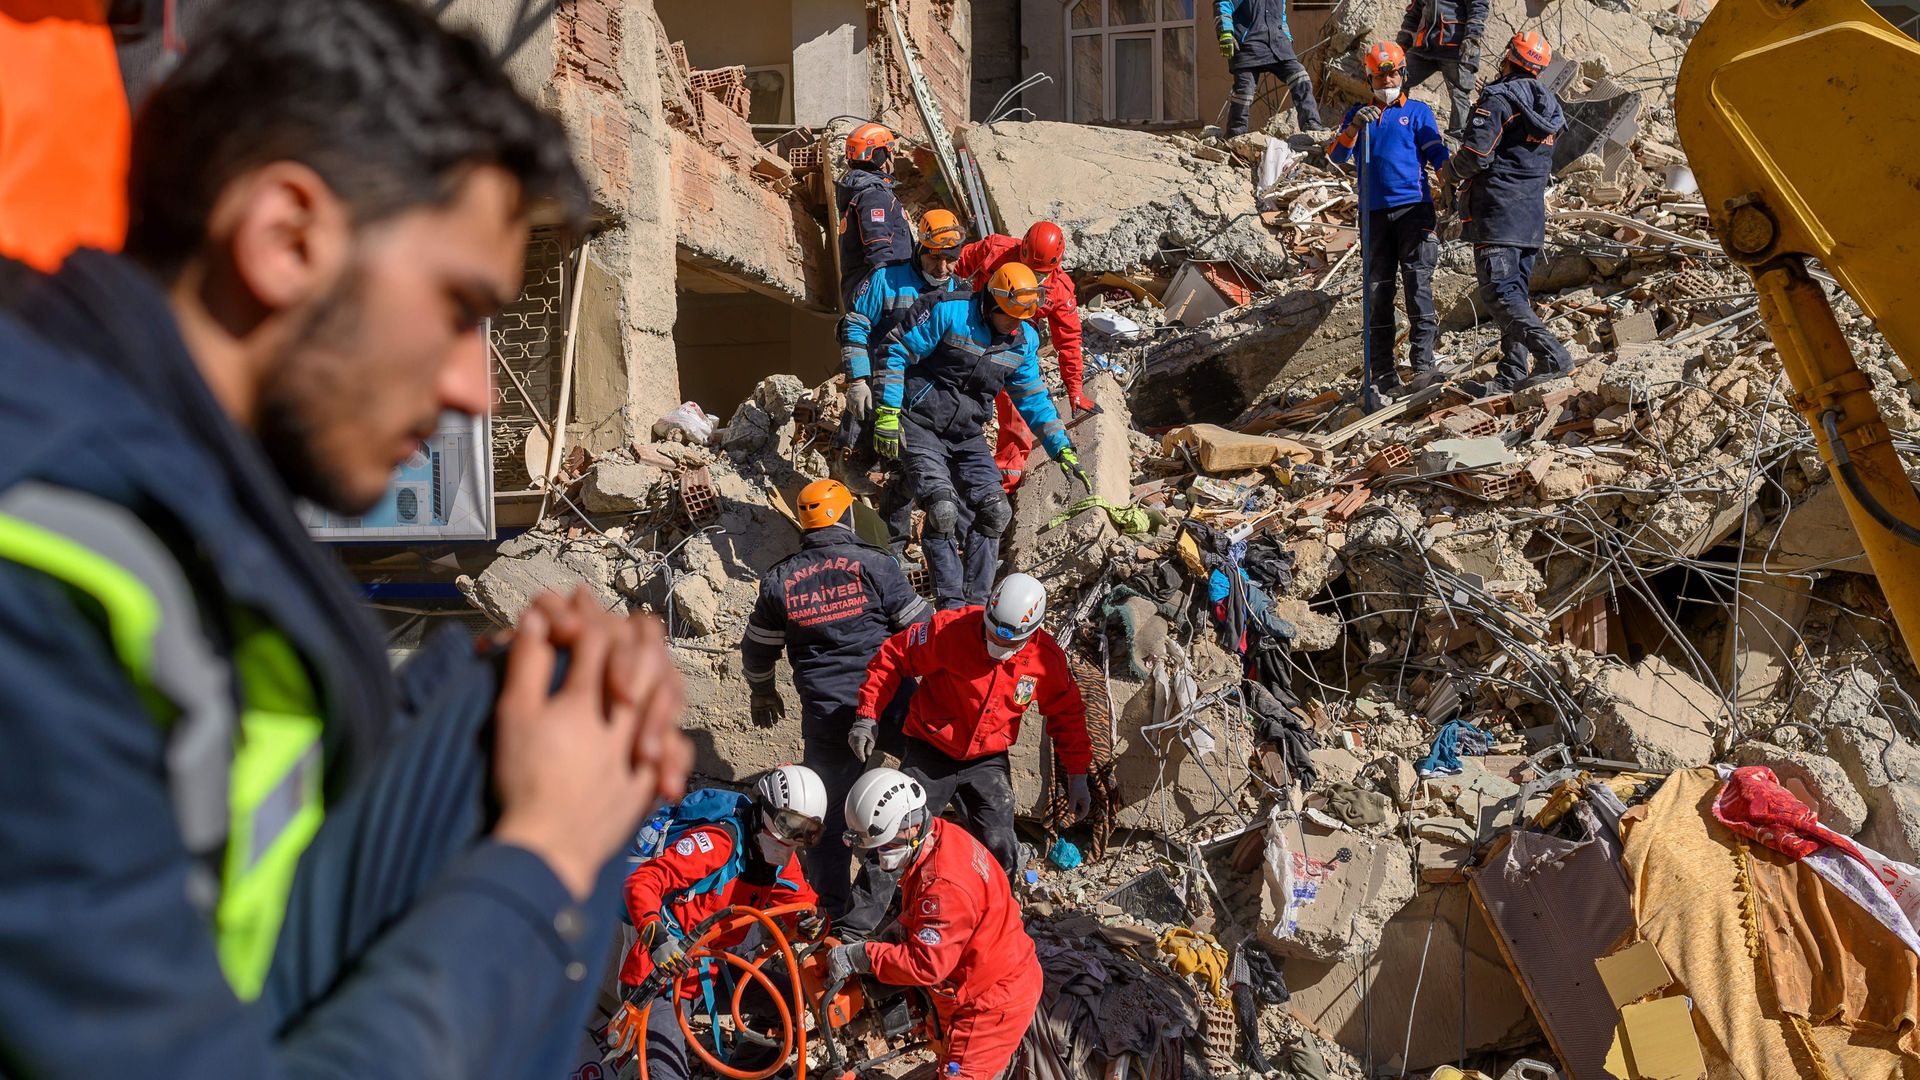 Rescue workers work amid the rubble of a building after an earthquake in Elazig, eastern Turkey